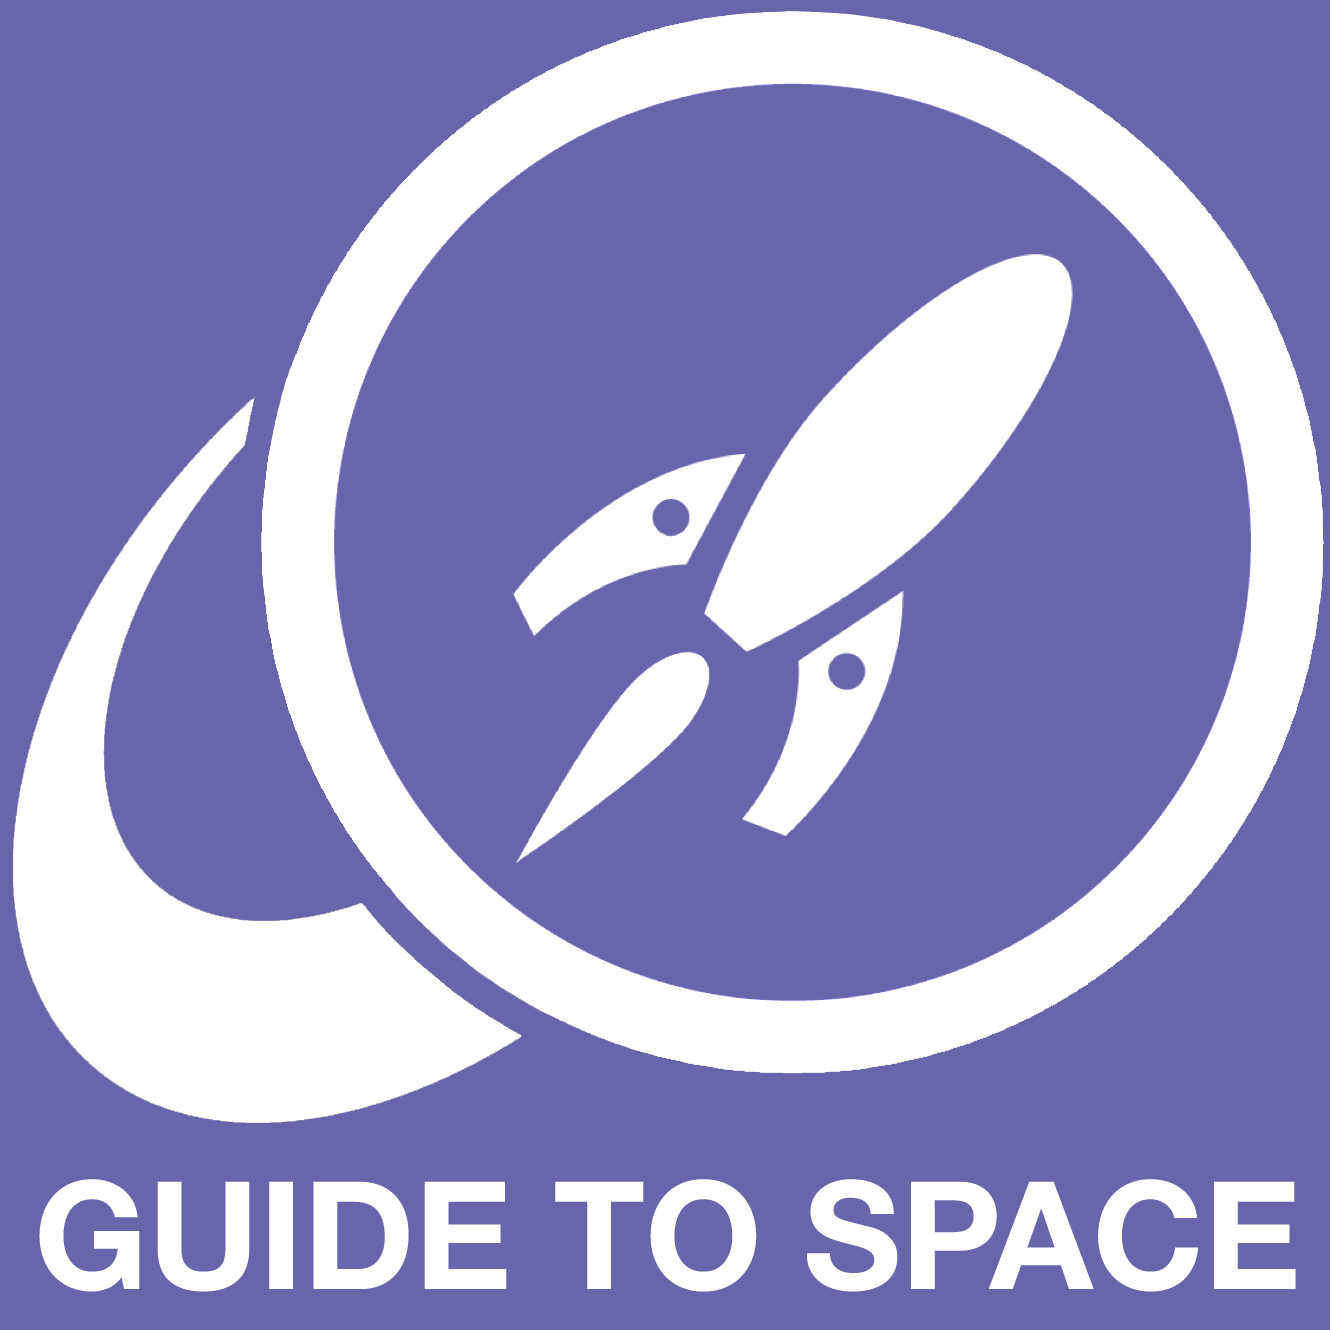 Mar 24th: Building Space Telescopes… In Space